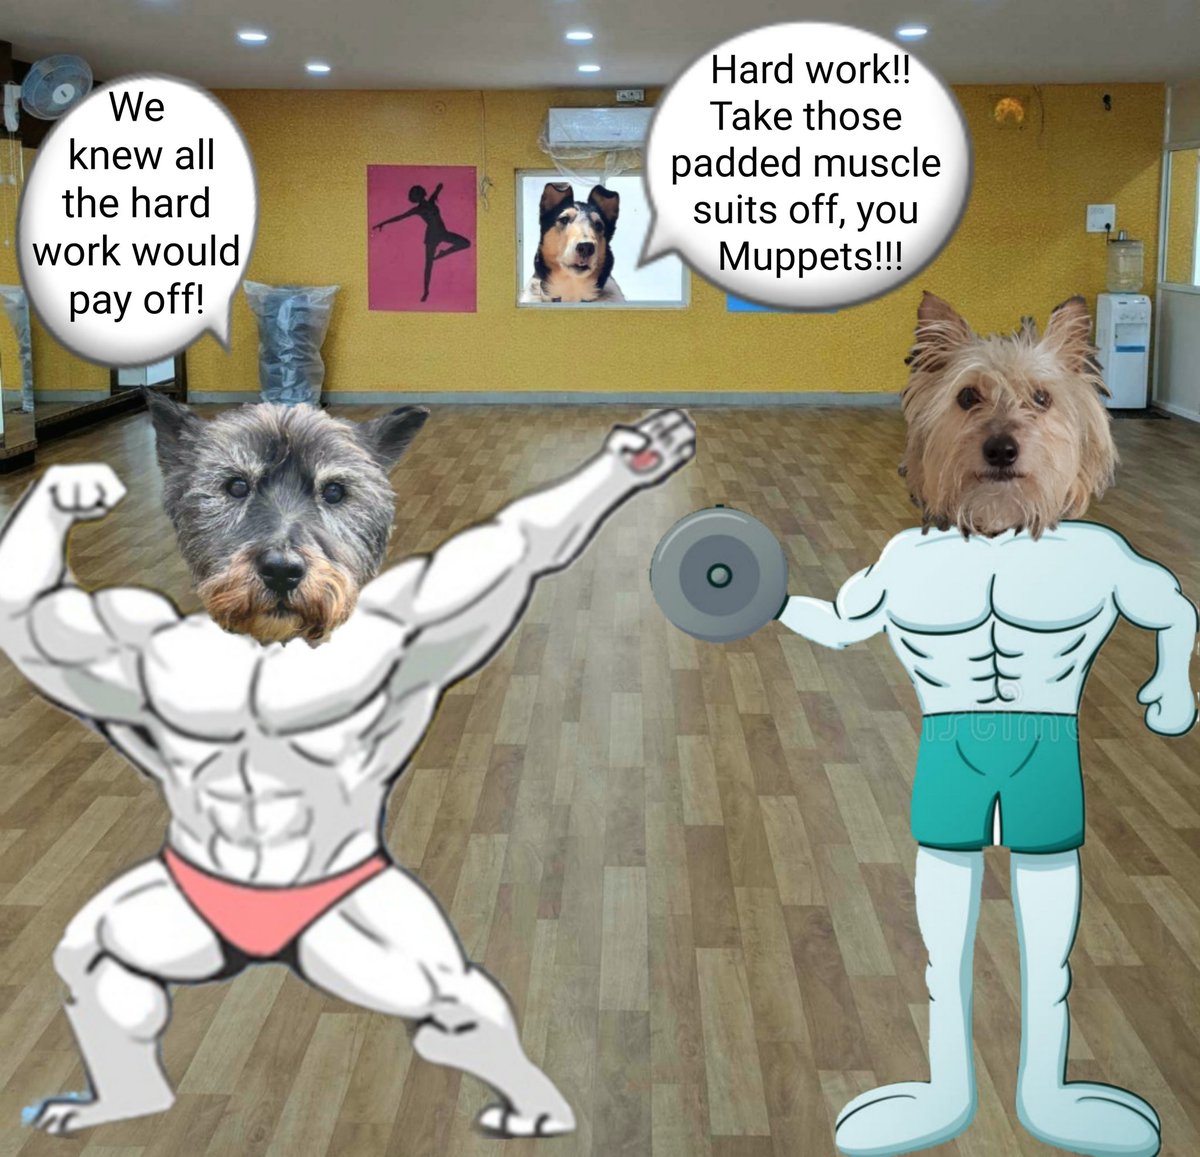 Throwback Thursday when me and Rupes went to the gym to put in some hard work....... our muscles were the envy of many a fella! No Miss Twiggy, they aren't padded suits!!
#OrAreThey 
#ThrowbackThursday #BovverBoys @jennystape #thosewerethedays #FeedMeNow #memories #backintheday